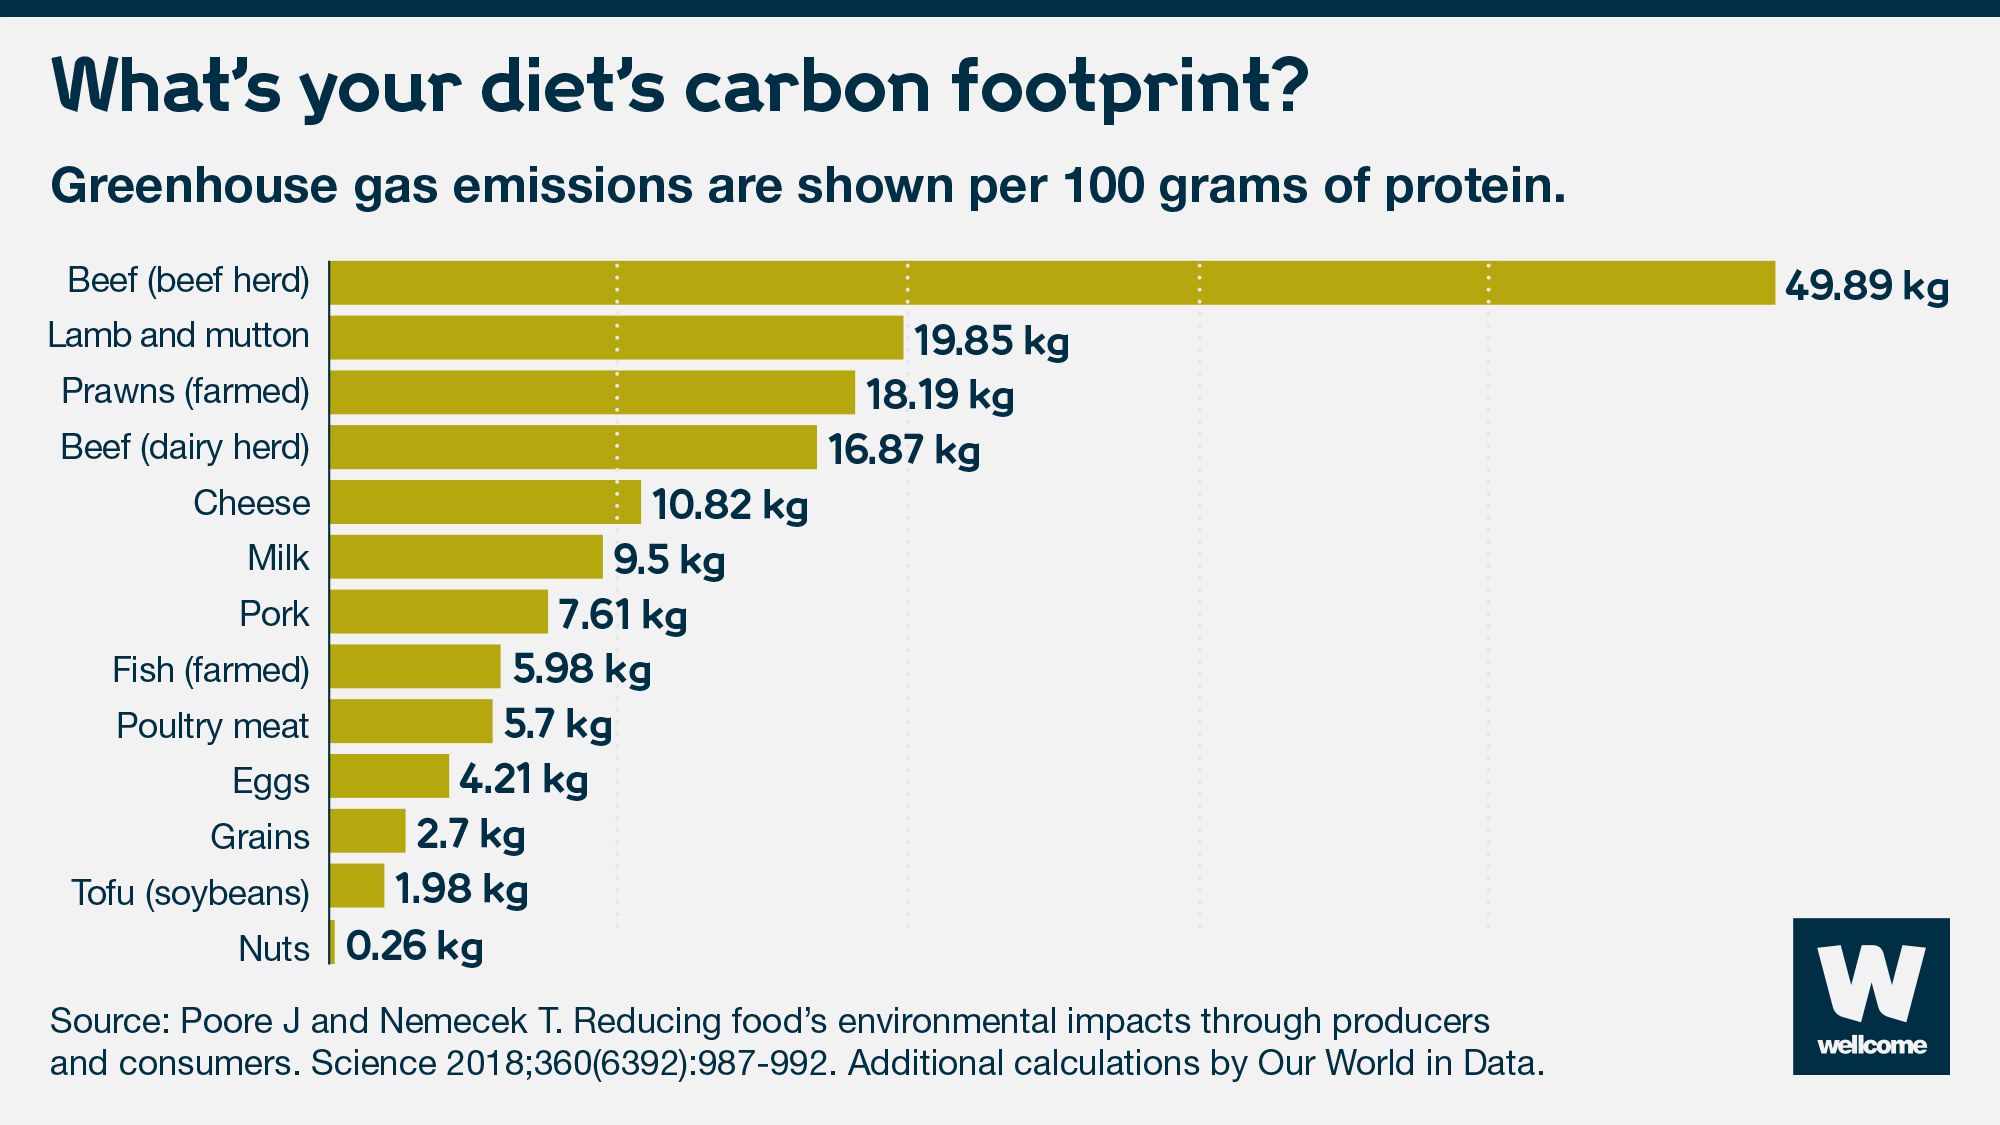 Bar chart showing greenhouse gas emissions per 100 grams of protein.